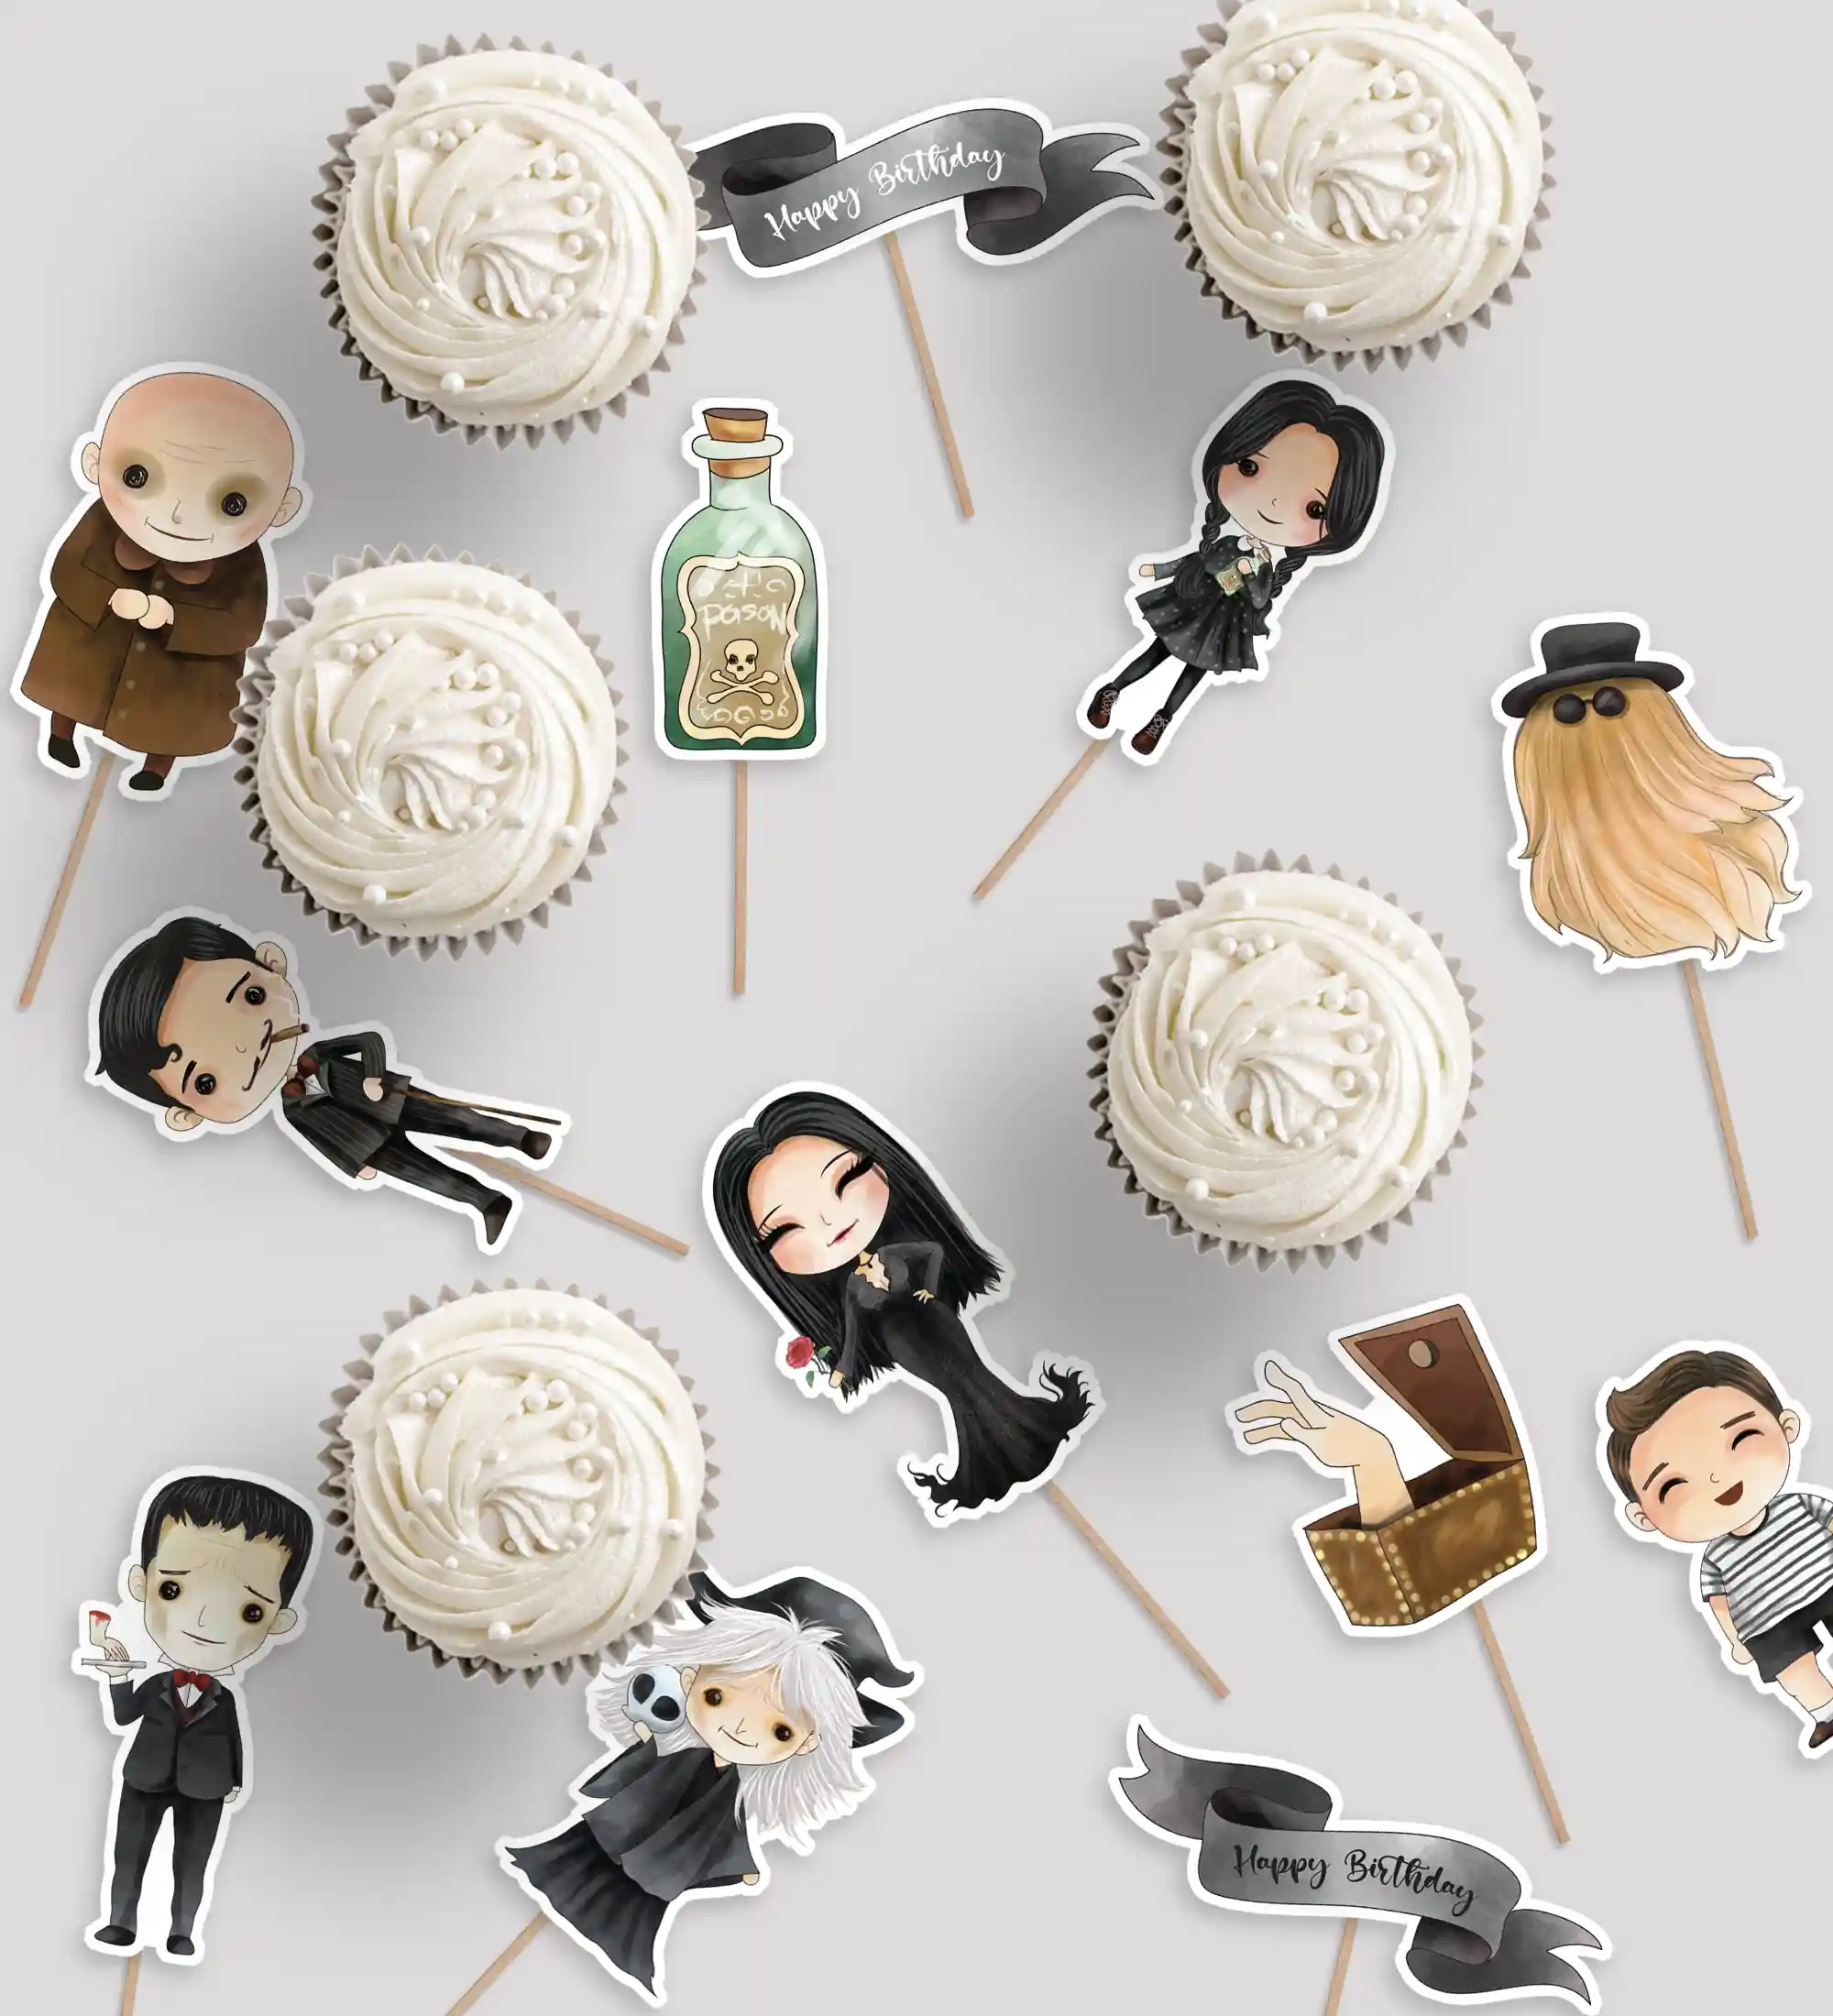 Addams family cupcake toppers. Download the printables for a Wednesday birthday party, Addams Family themed baby shower, or a Wednesday viewing party. Cupcake toppers include Cousin Itt, Wednesday, Morticia, Gomez, Lurch, and more.